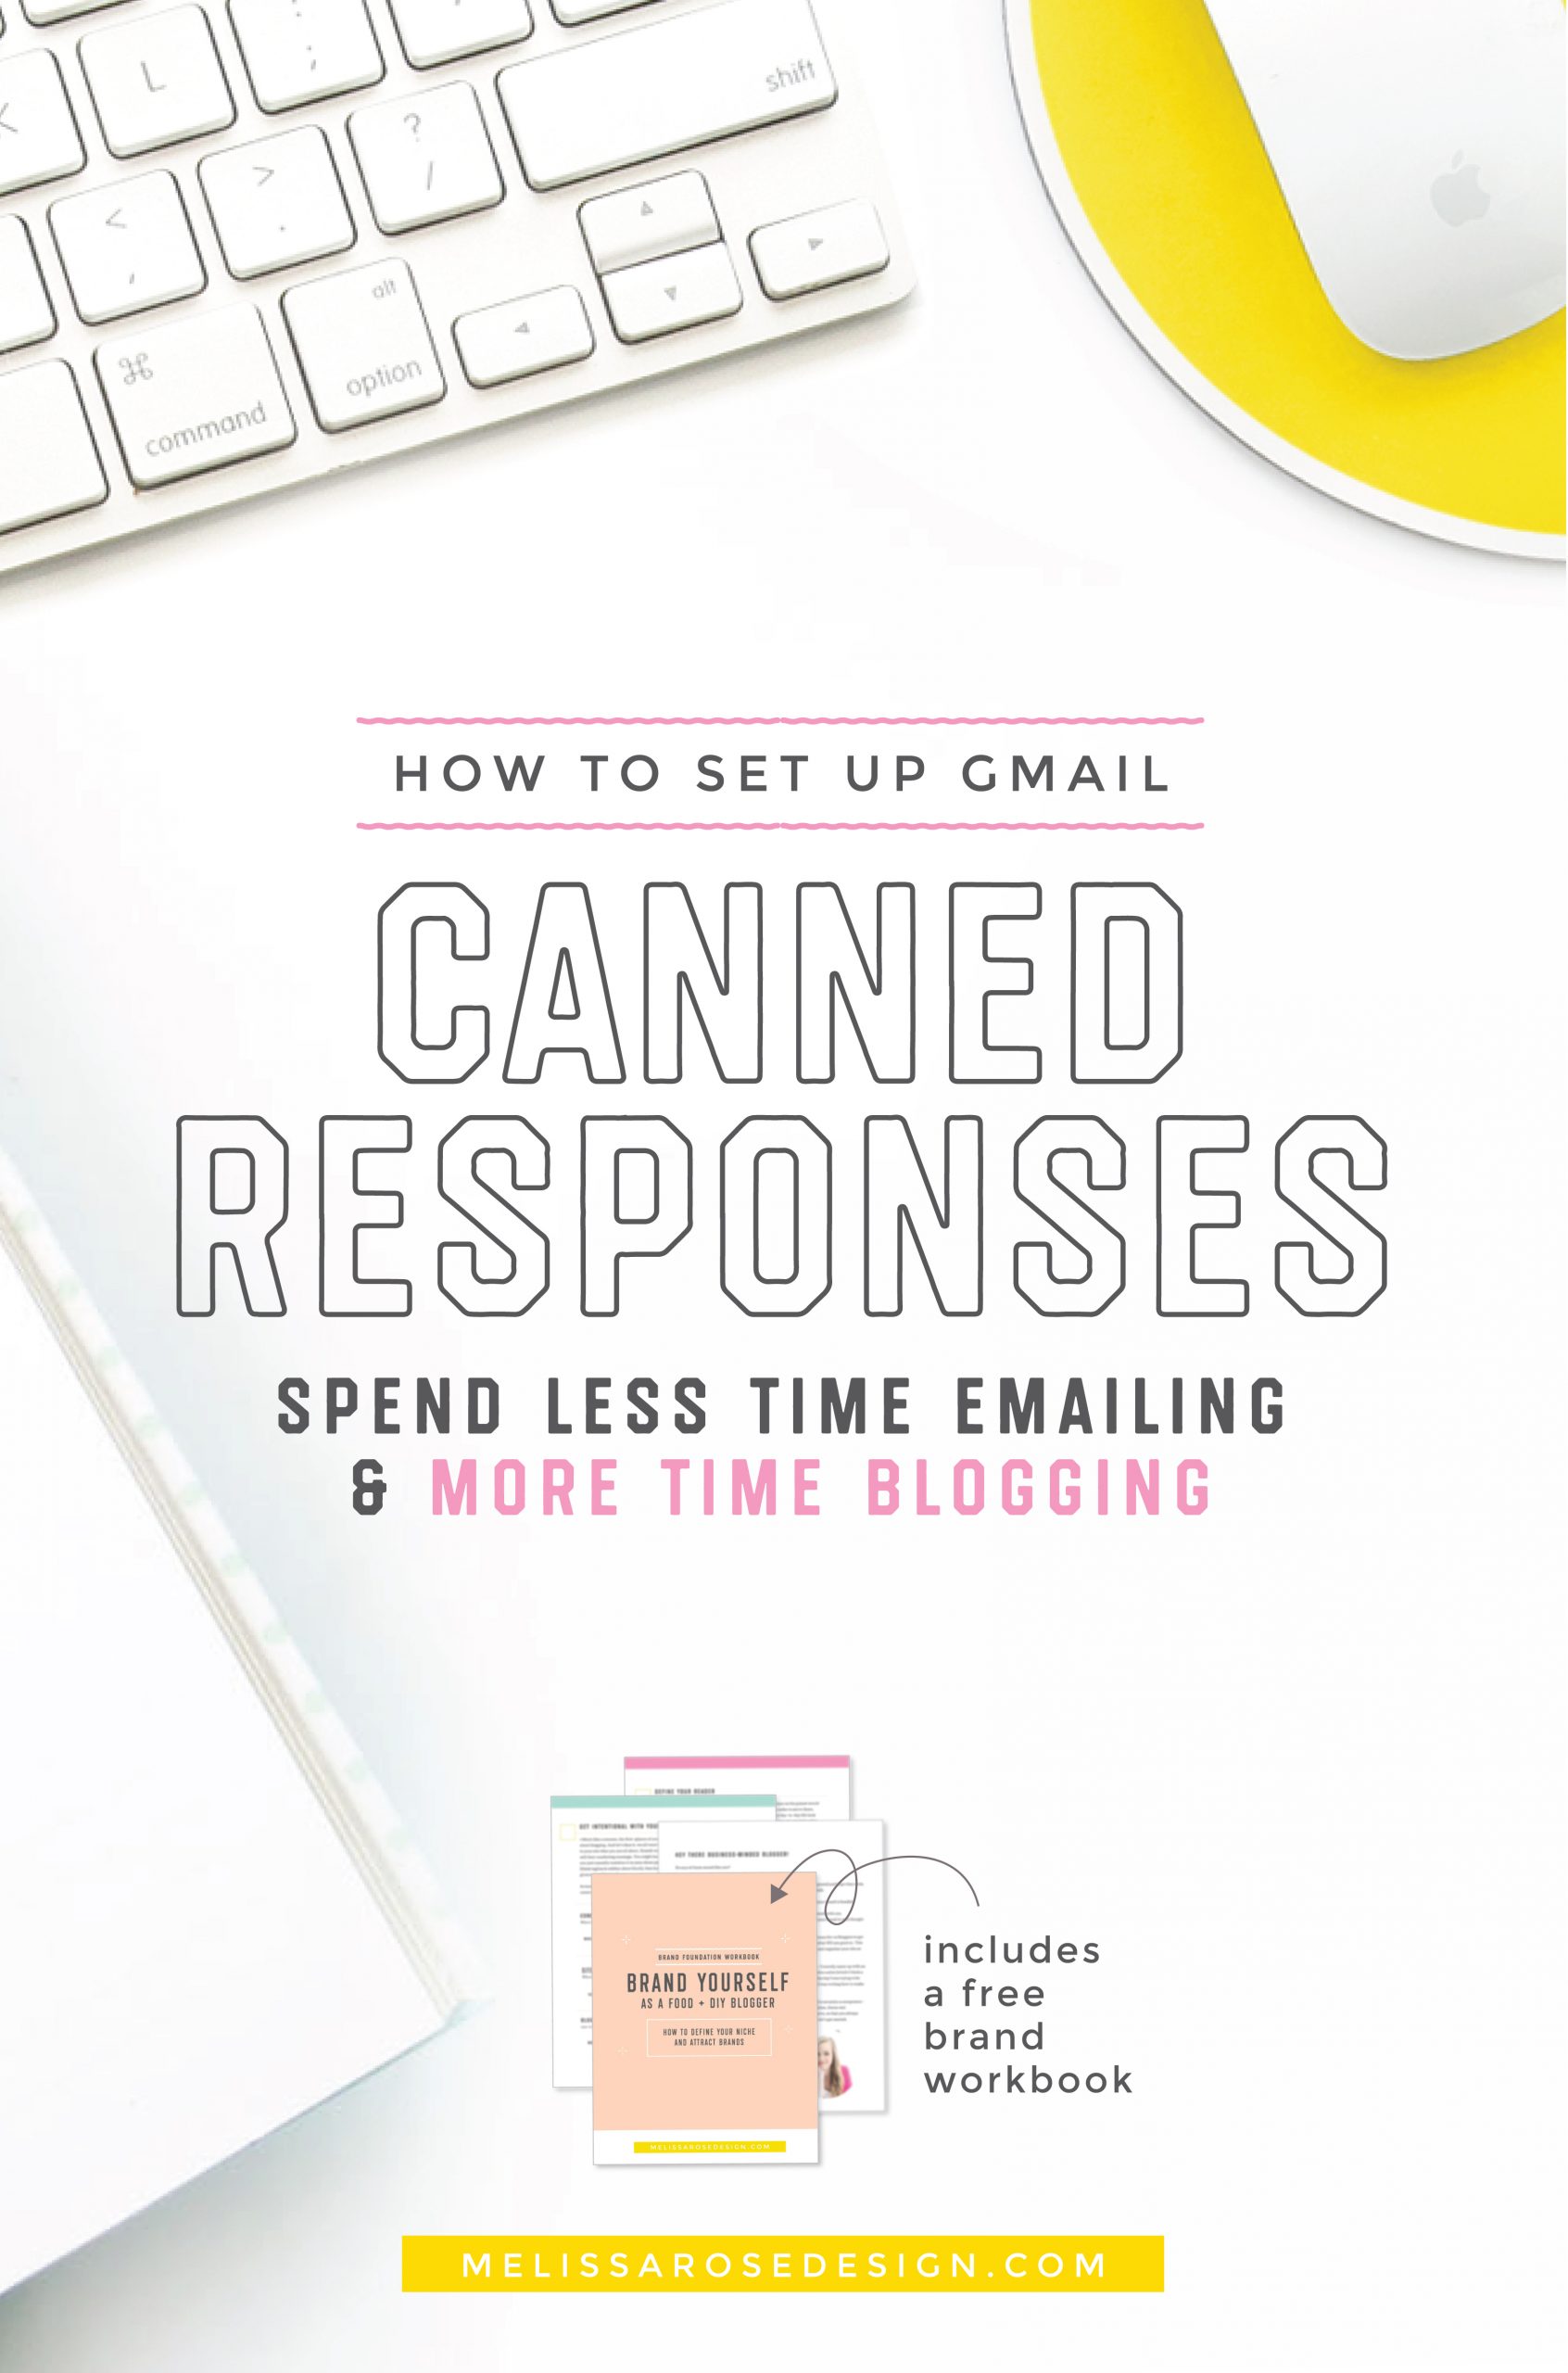 Spend less time emailing & more time blogging by setting up canned responses for emails you send often. Read the post for a step-by-step guide for setting it up in Gmail. | #Blogging #FoodBlog | melissarosedesign.com